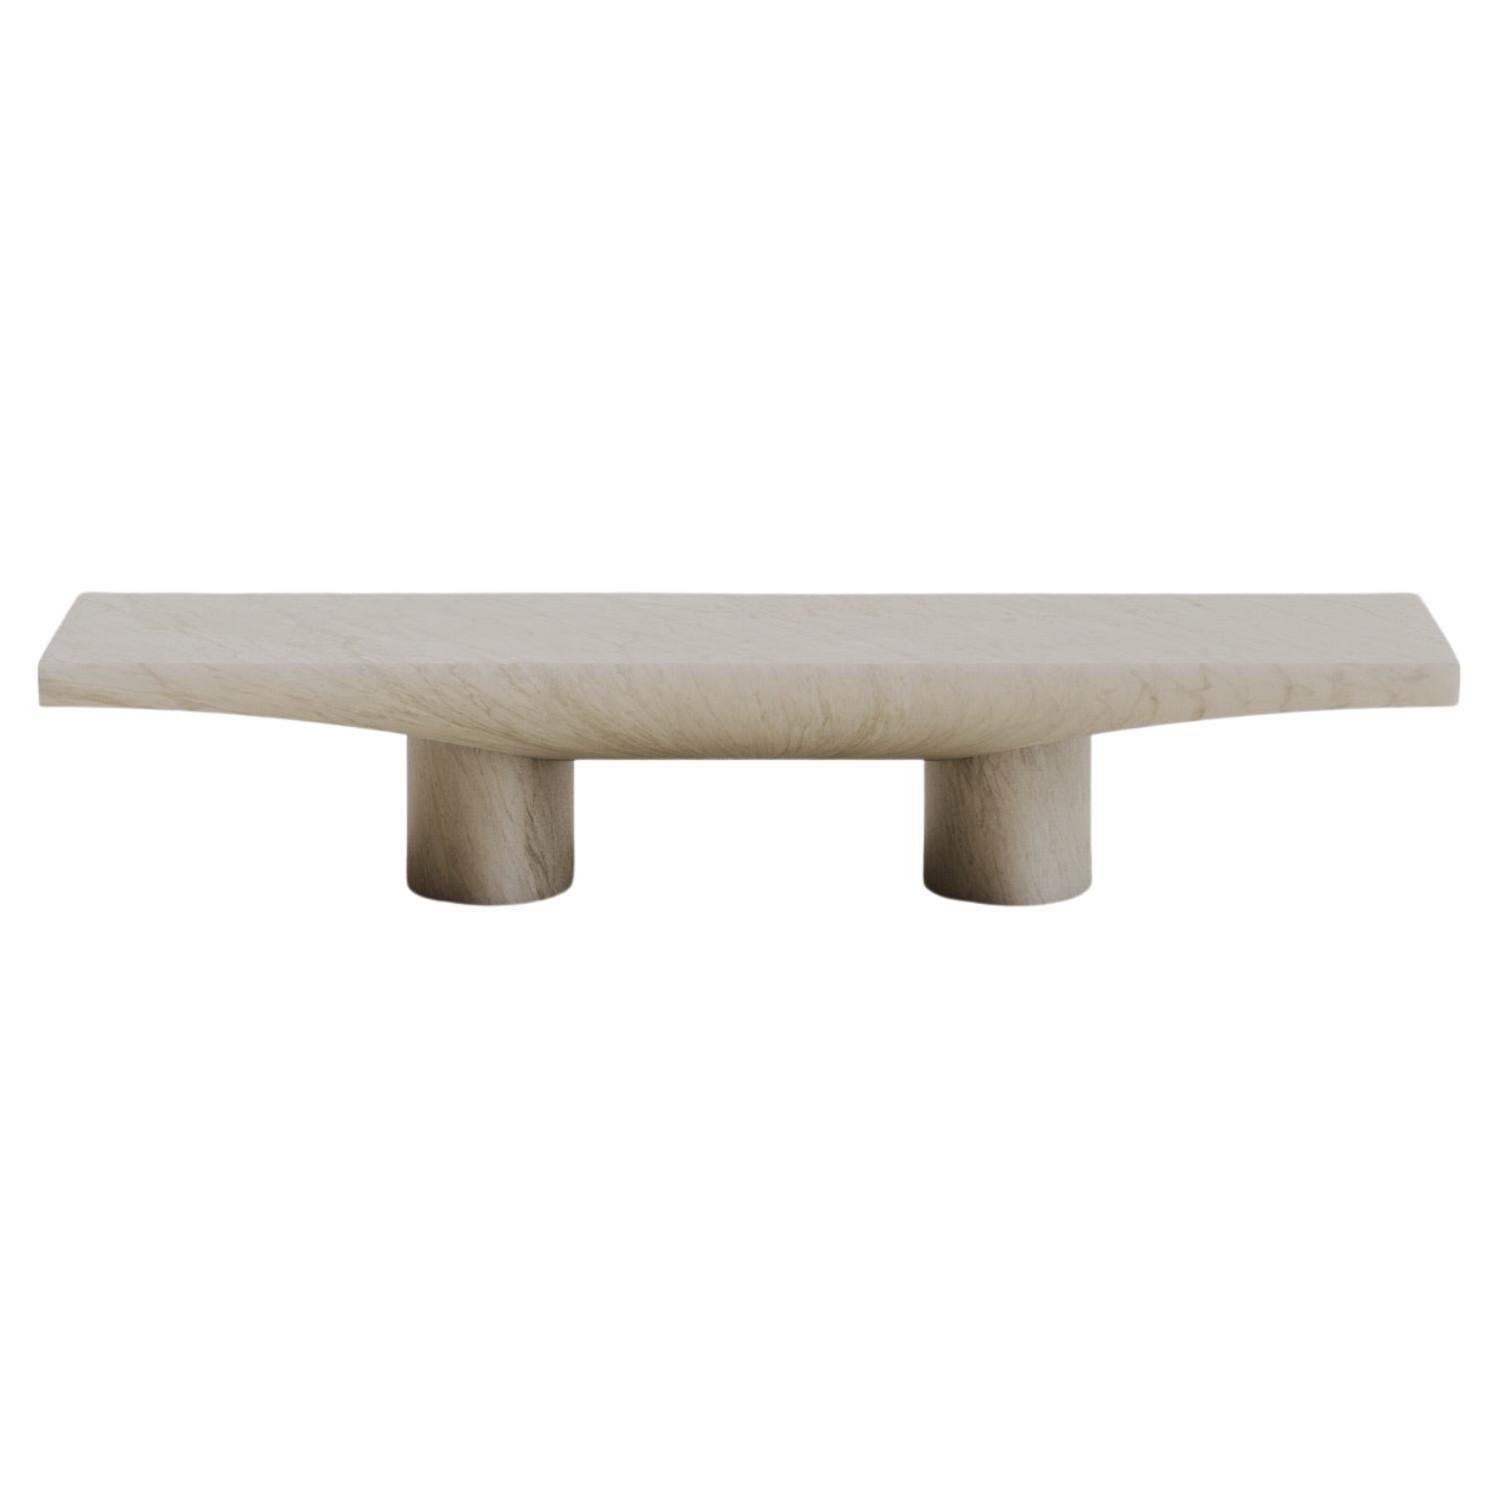 Solid White Marble Abraccio Rectangular Coffee Table 140 by Studio Narra For Sale